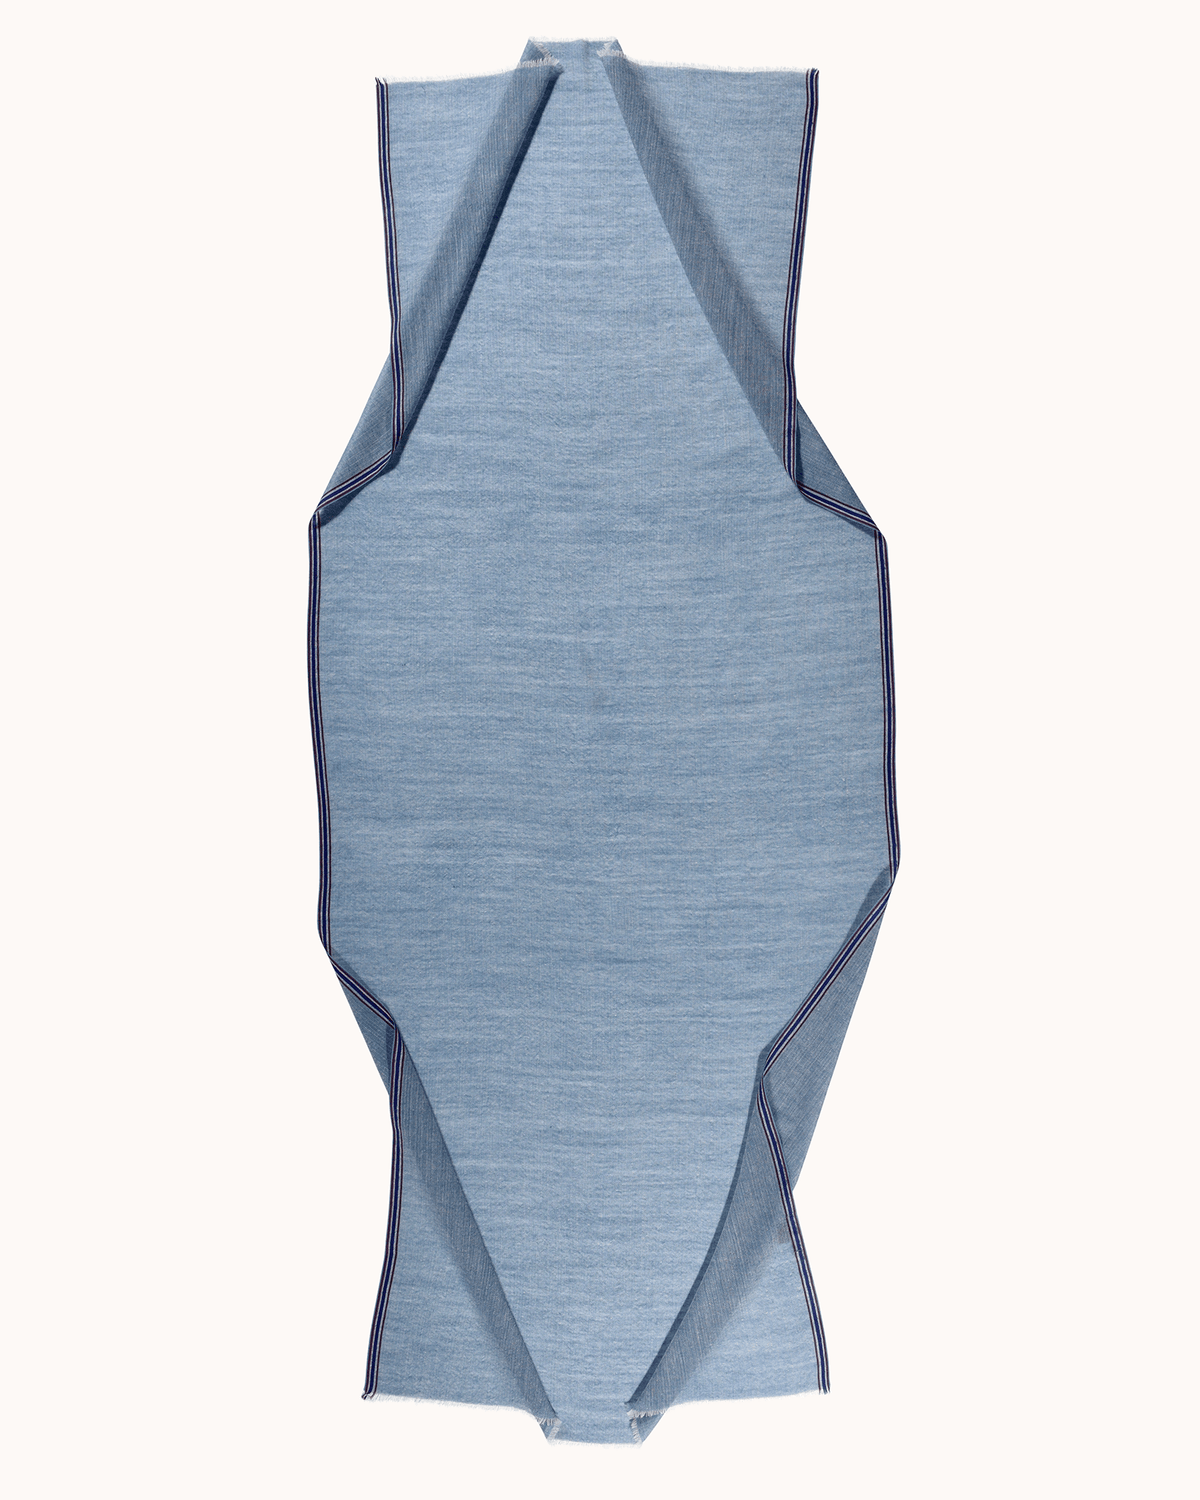 Épice Accessories Blue Shade Uni 3 Scarf in Blue Shade